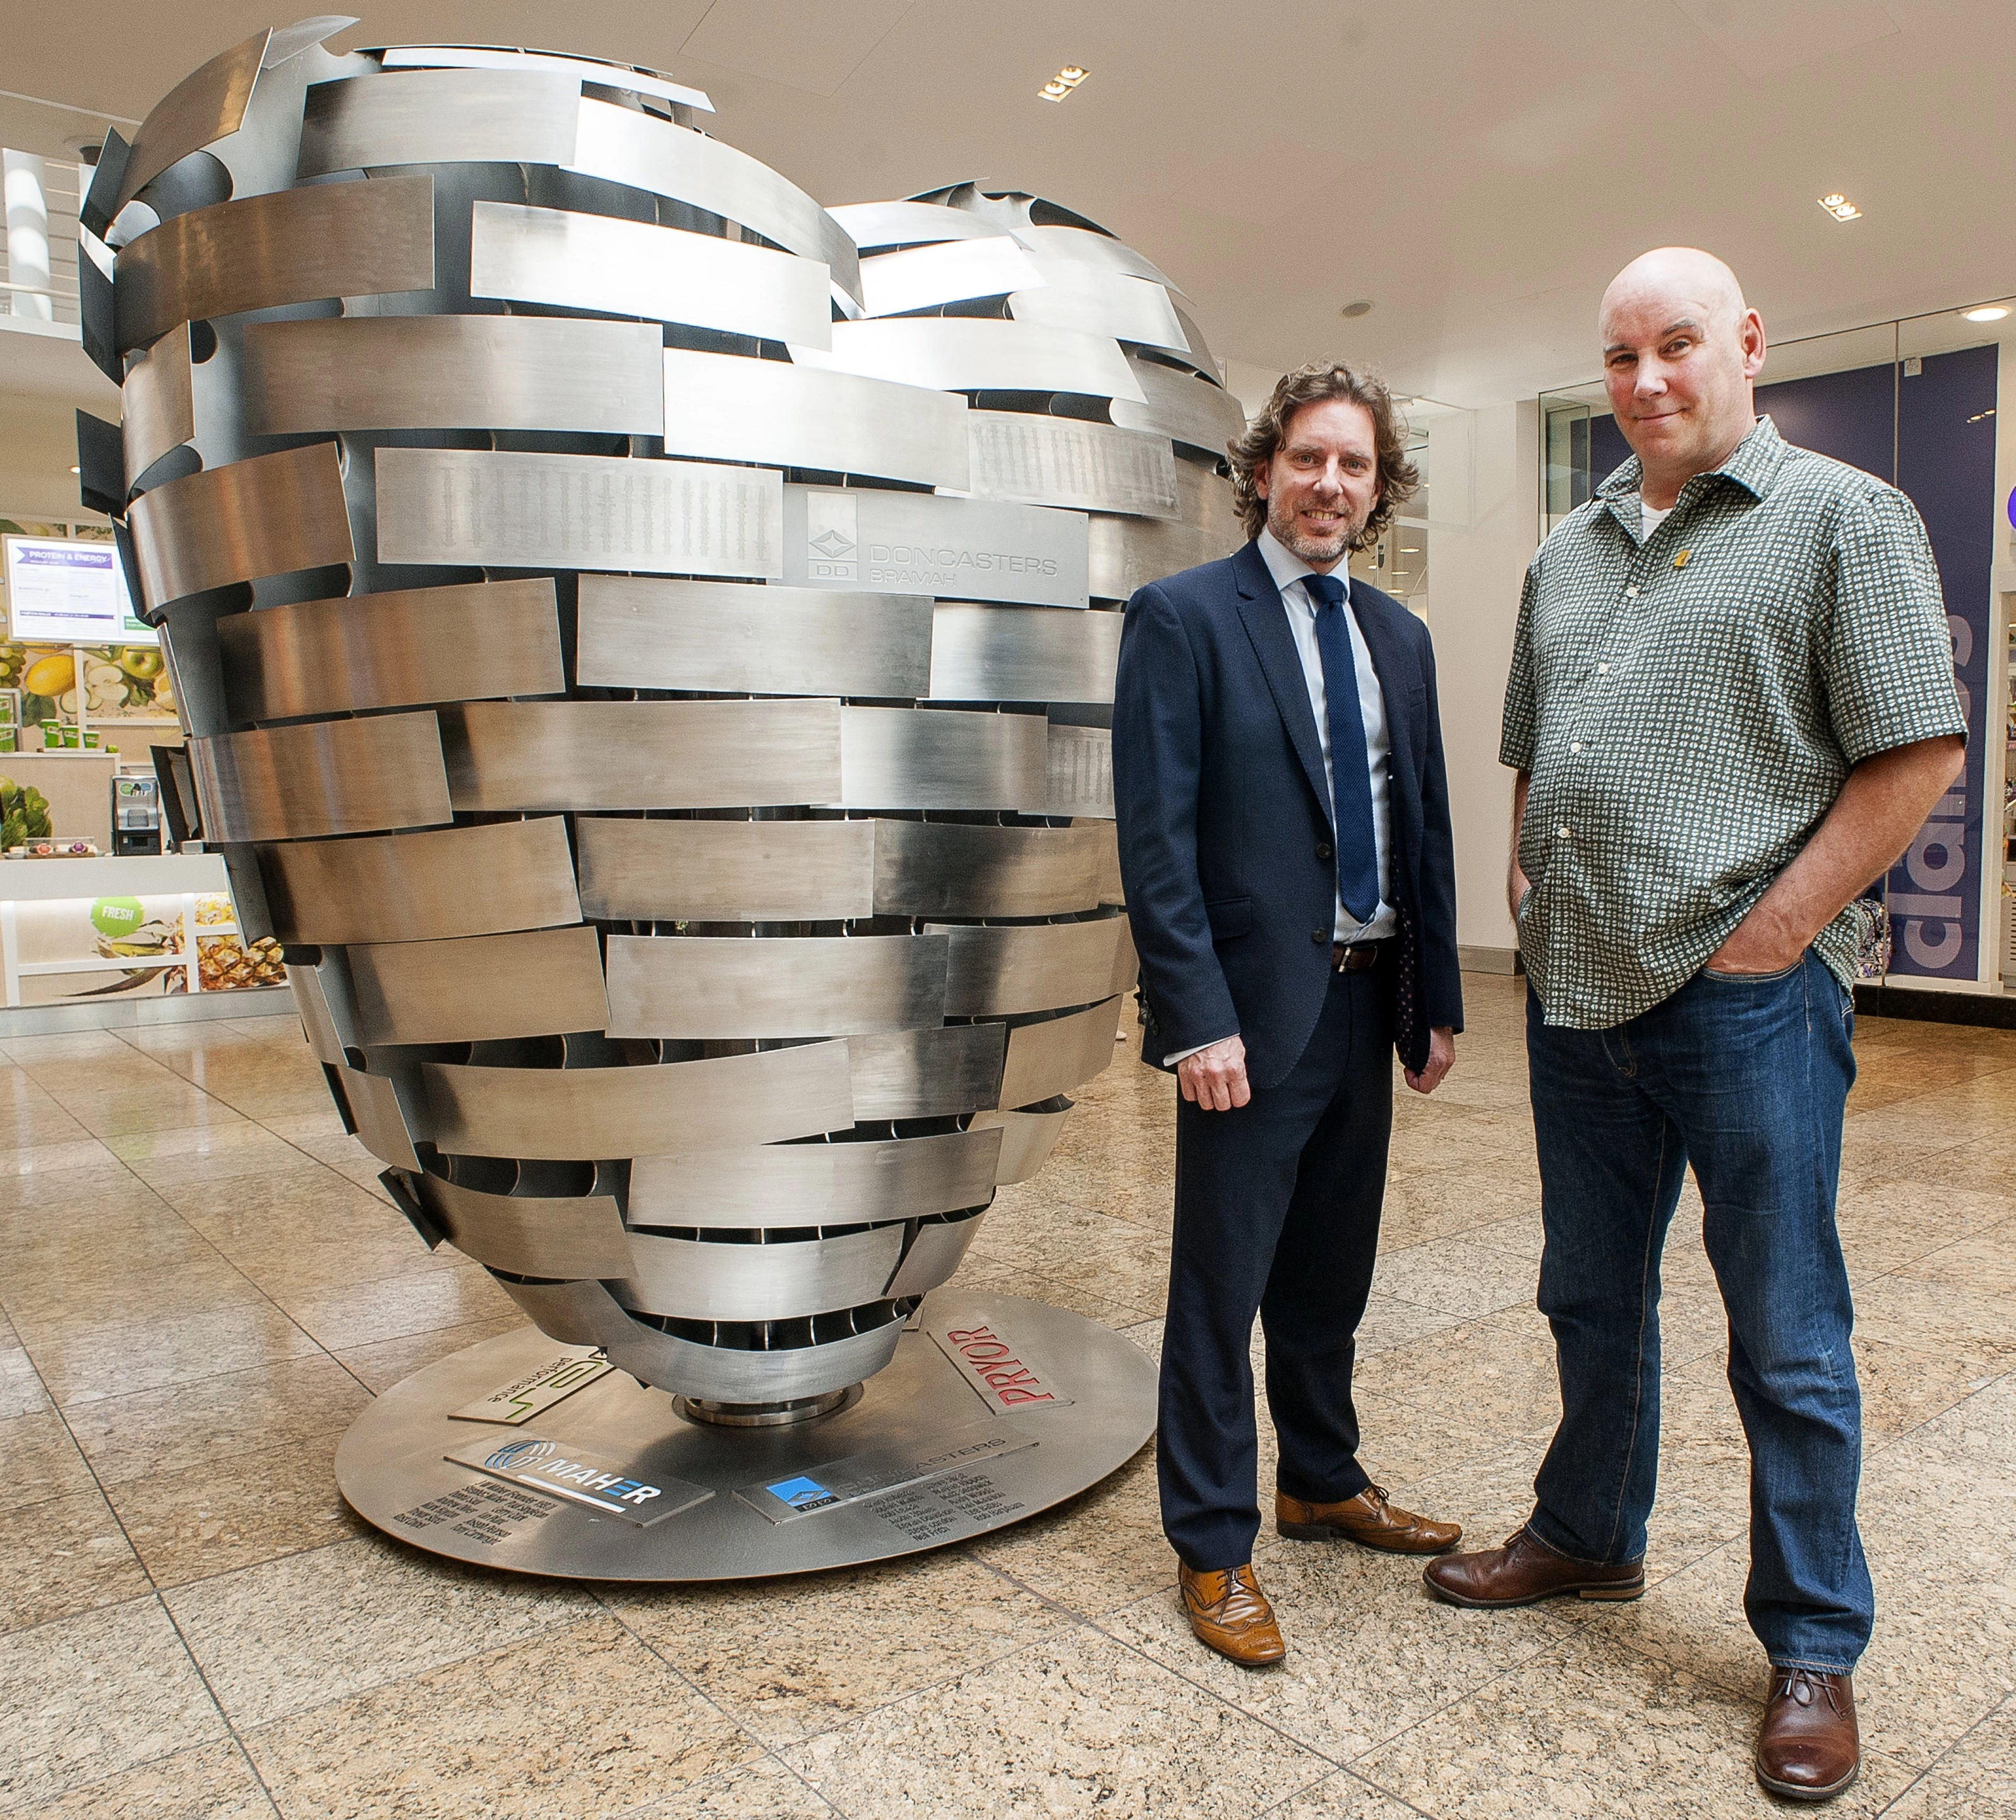 Richard Pinfold, Marketing Director Meadowhall and Steve Mehdi, Heart of Steel artist